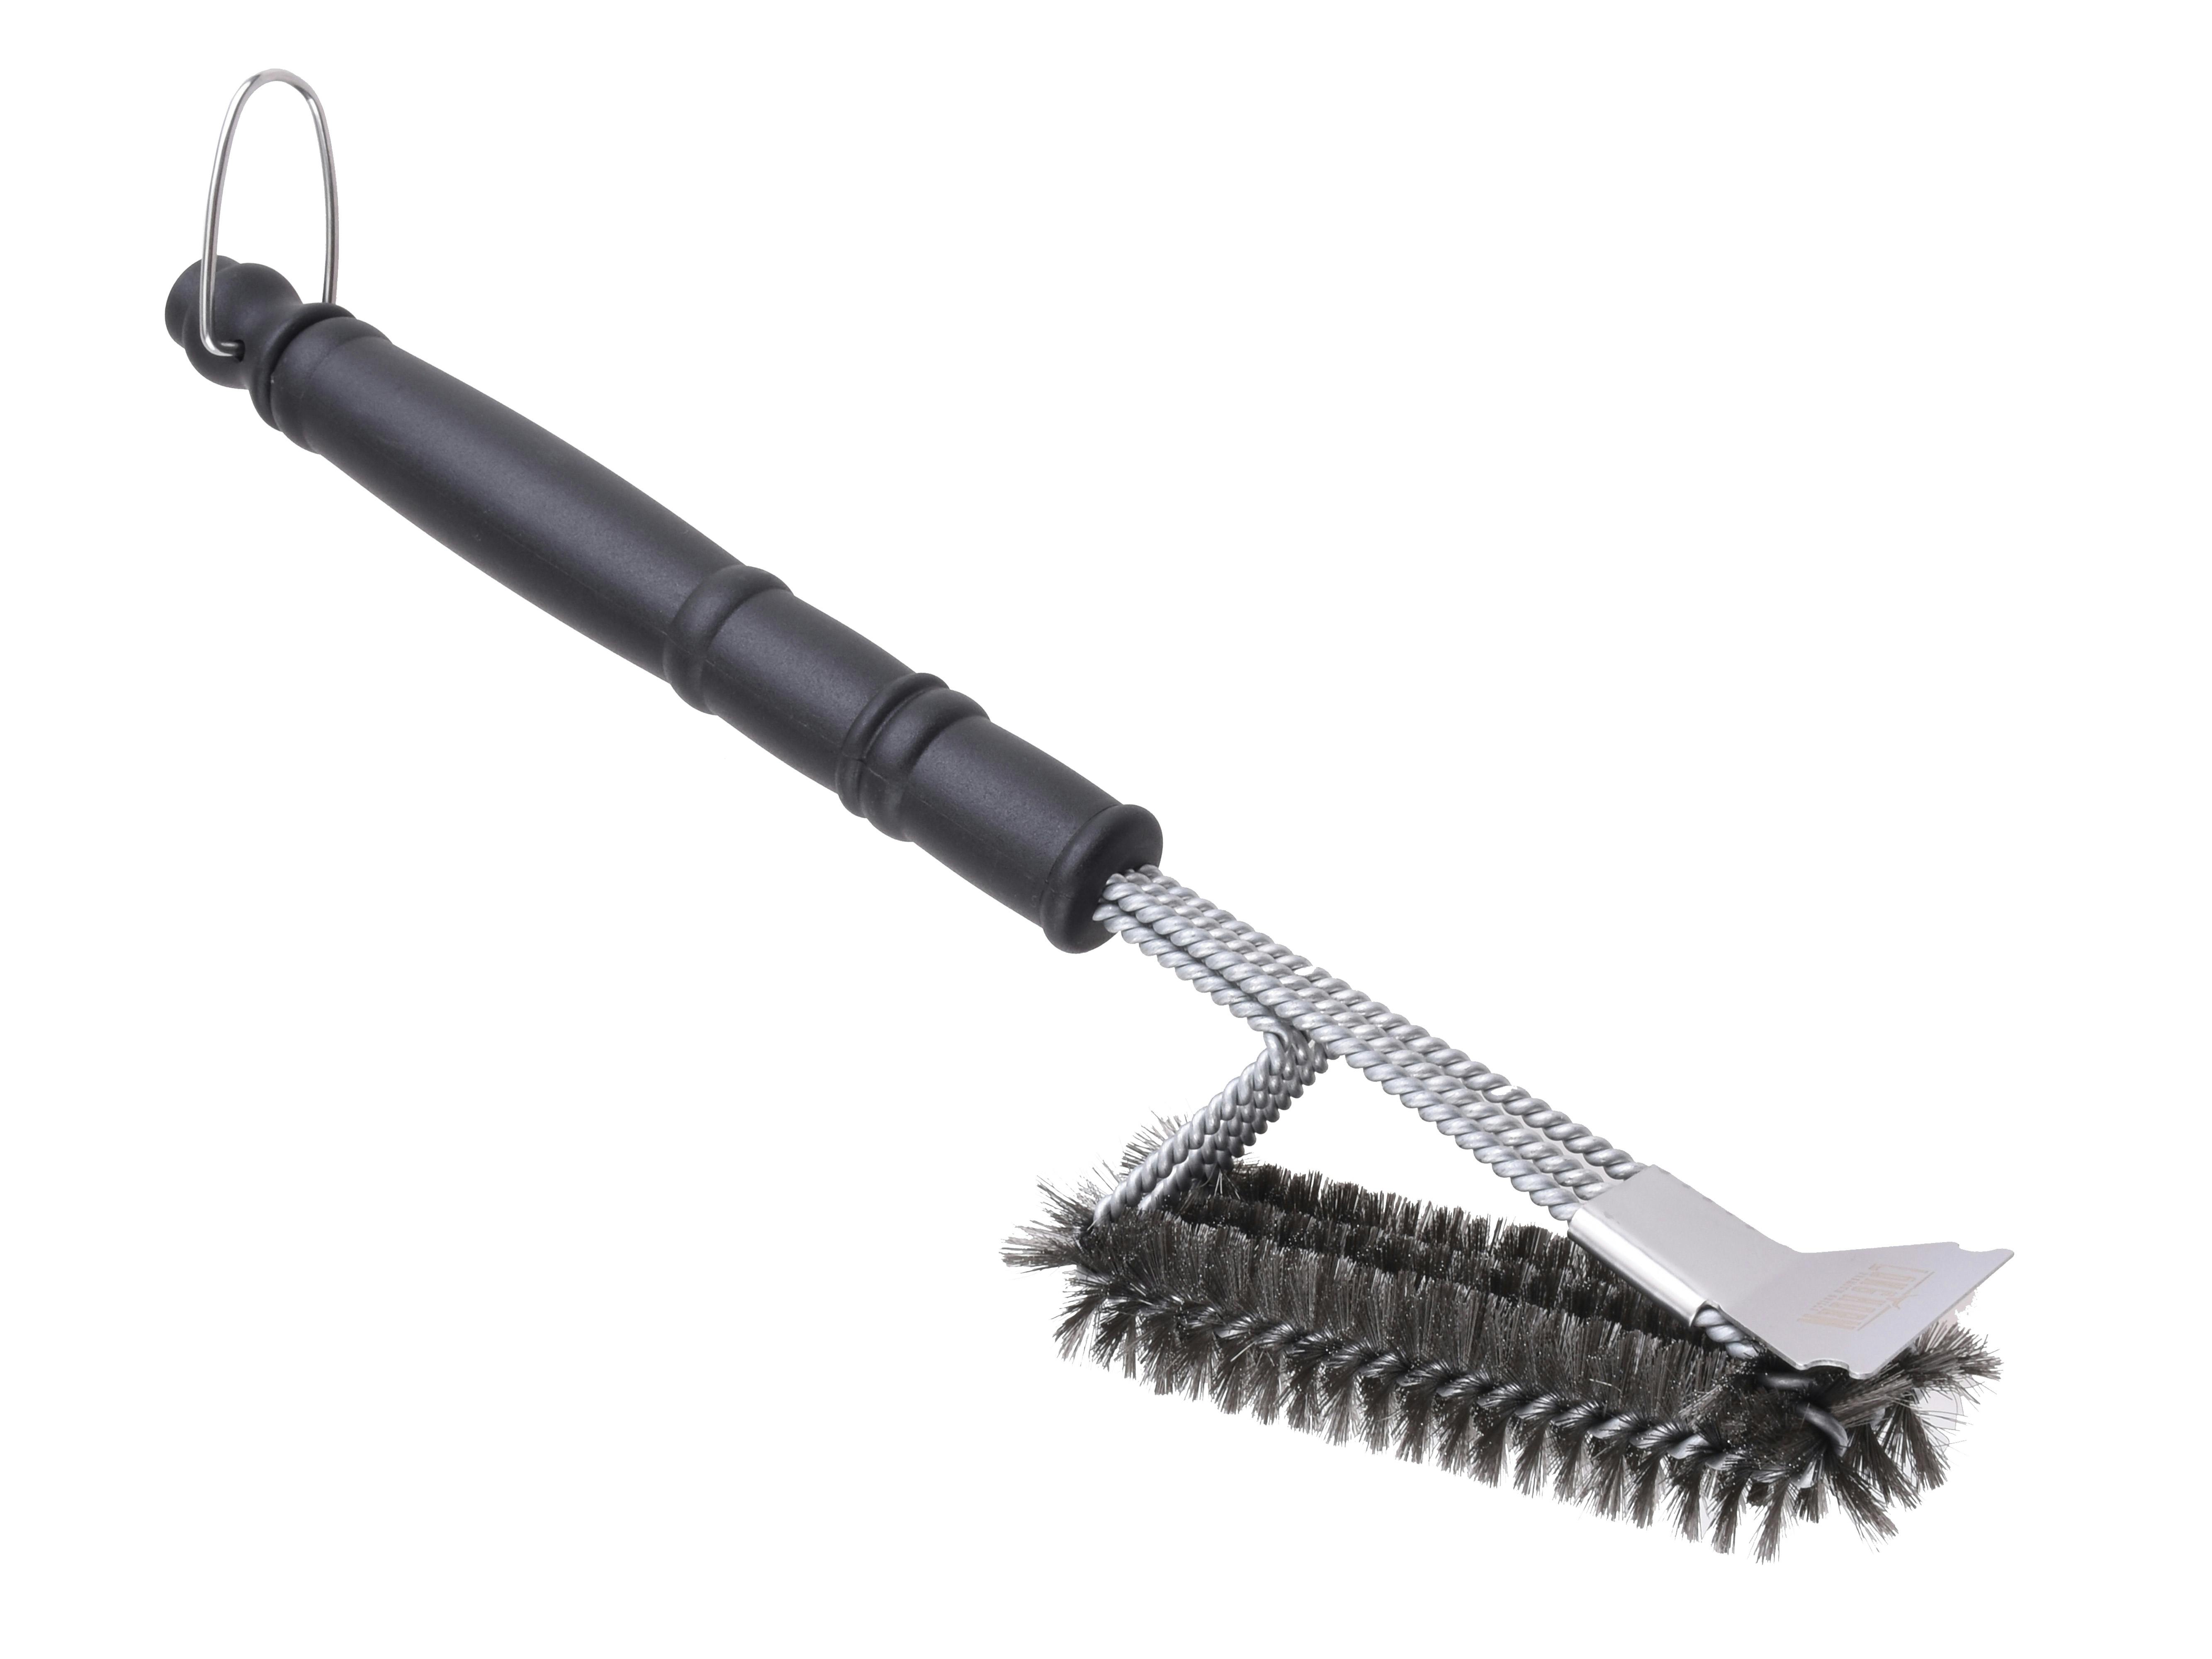 https://tradetested.imgix.net/catalog/product/_/9/_931290_stainless_steel_bbq_clean_brush_with_scraper-1.jpg?fit=fillmax&fill=solid&auto=format%2Ccompress